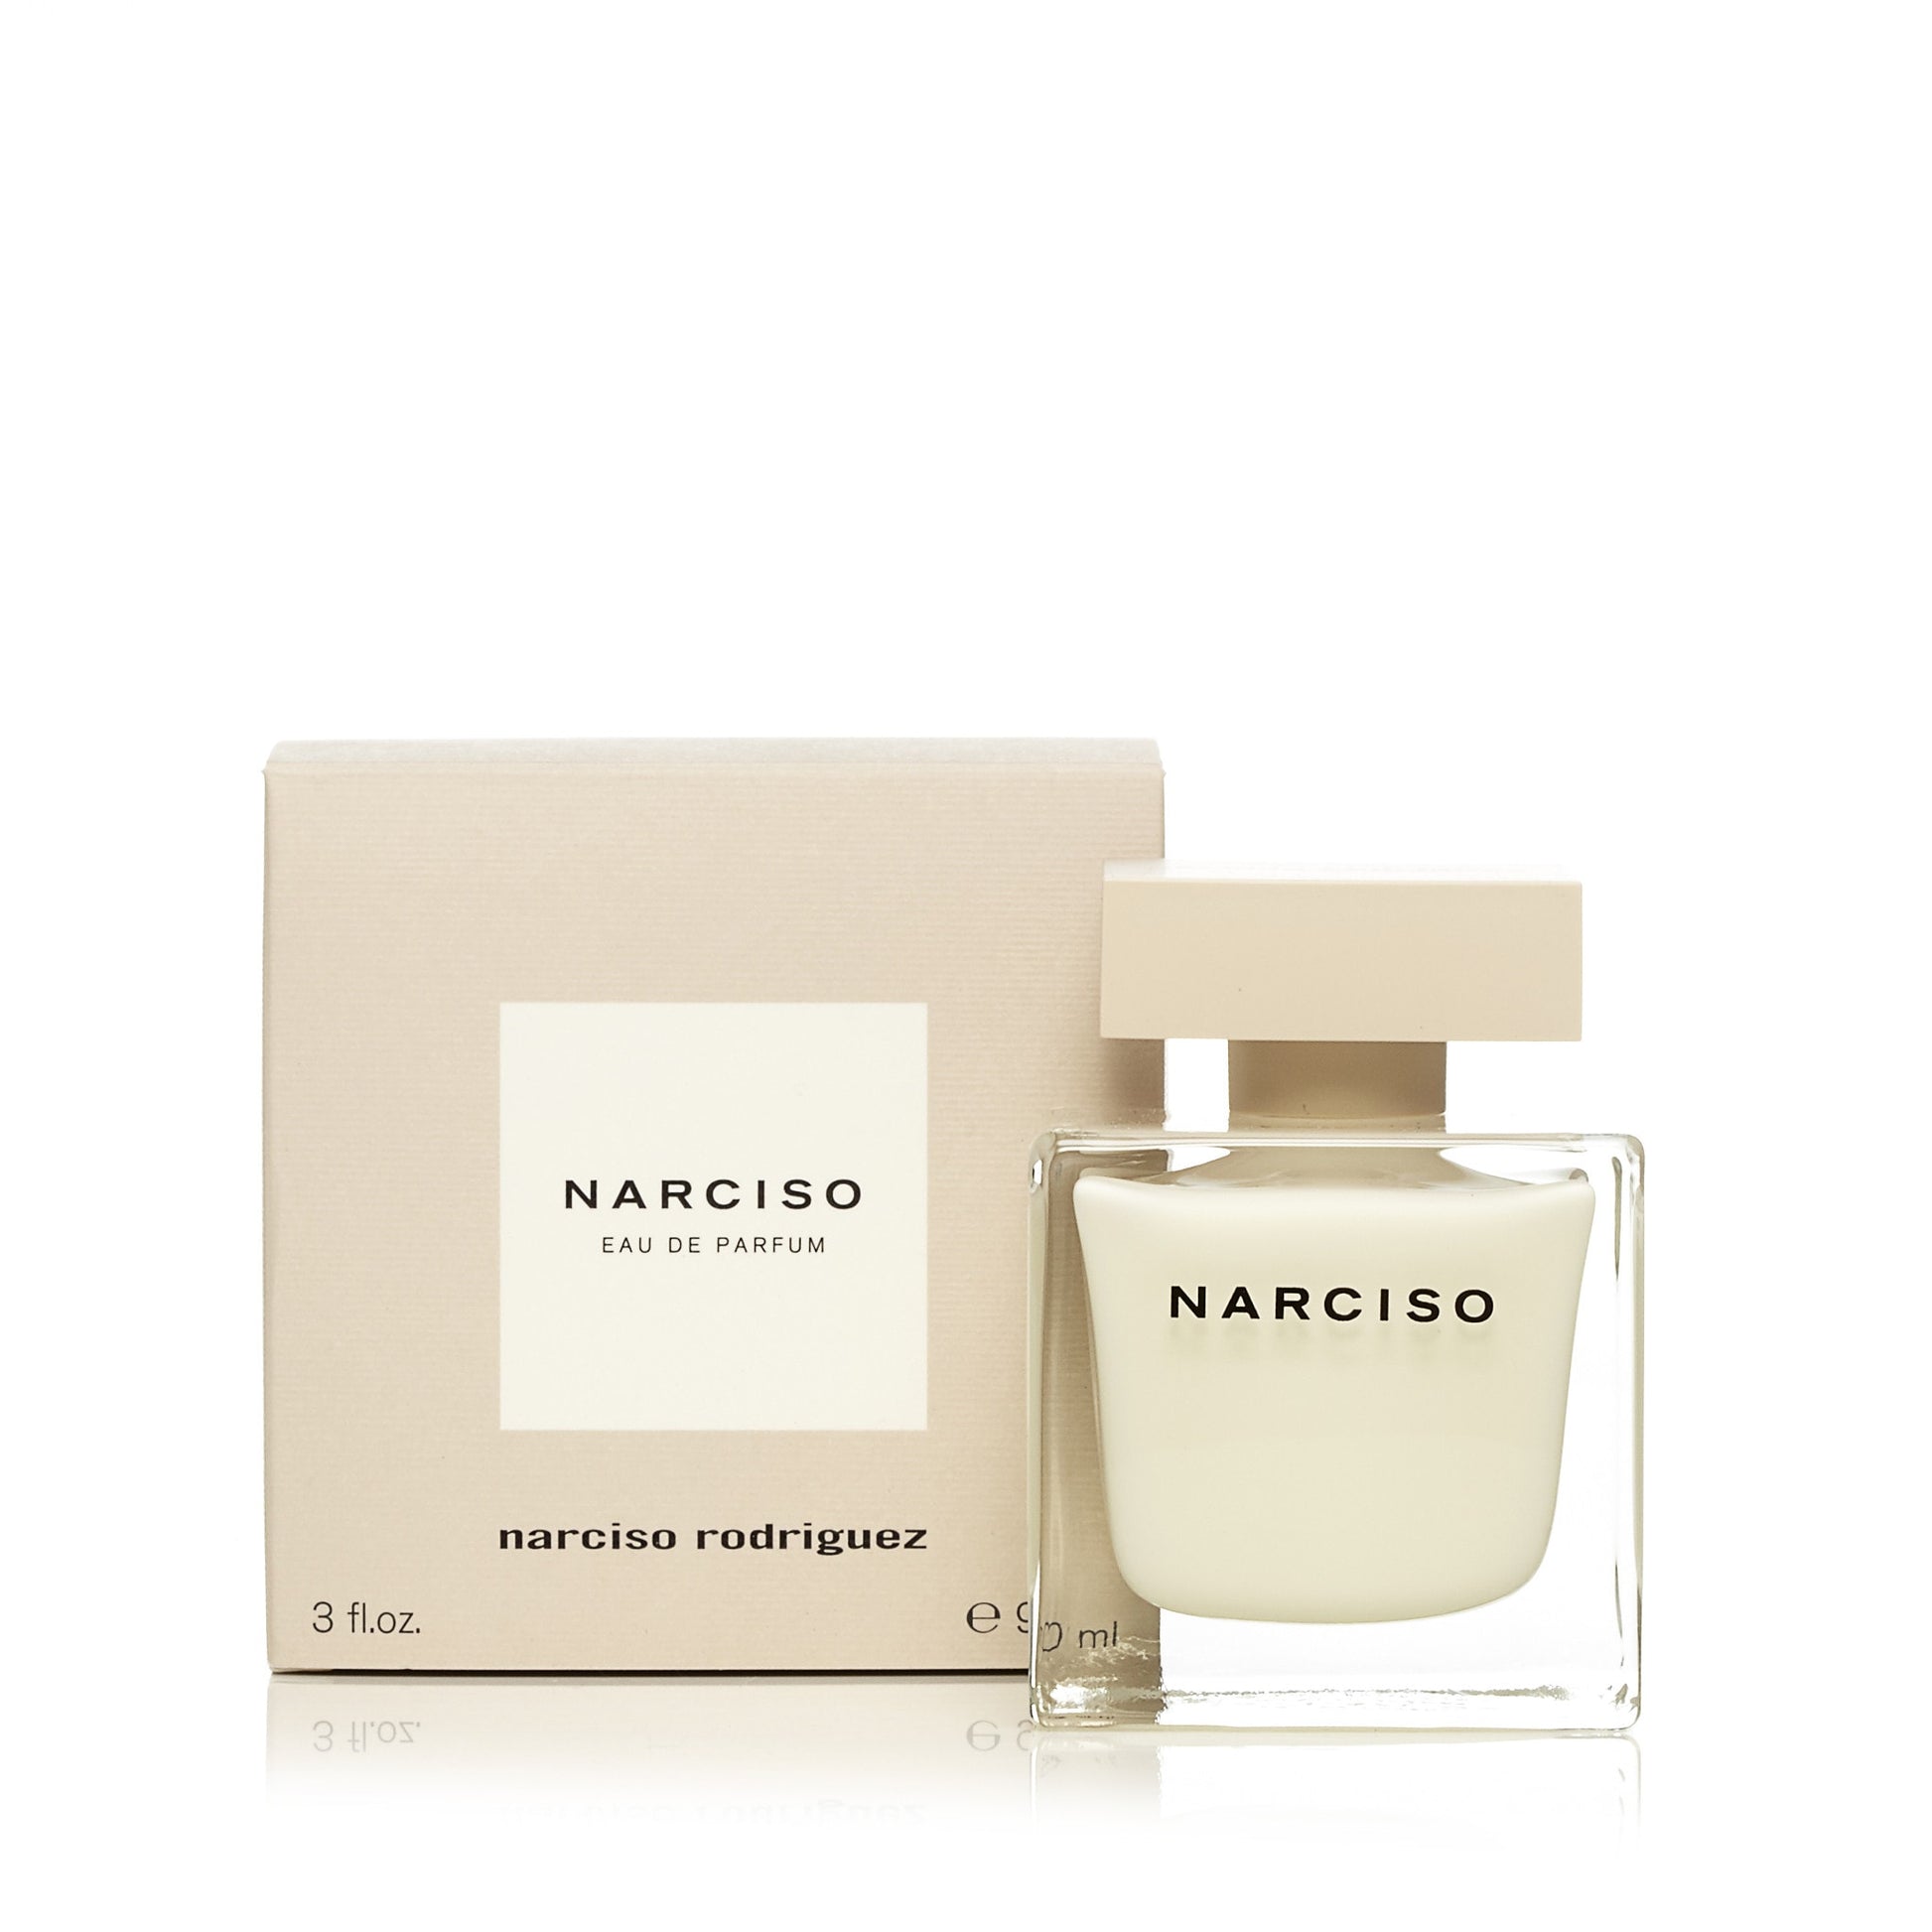 Narciso Eau de Parfum Spray for Women by Narciso Rodriguez, Product image 2